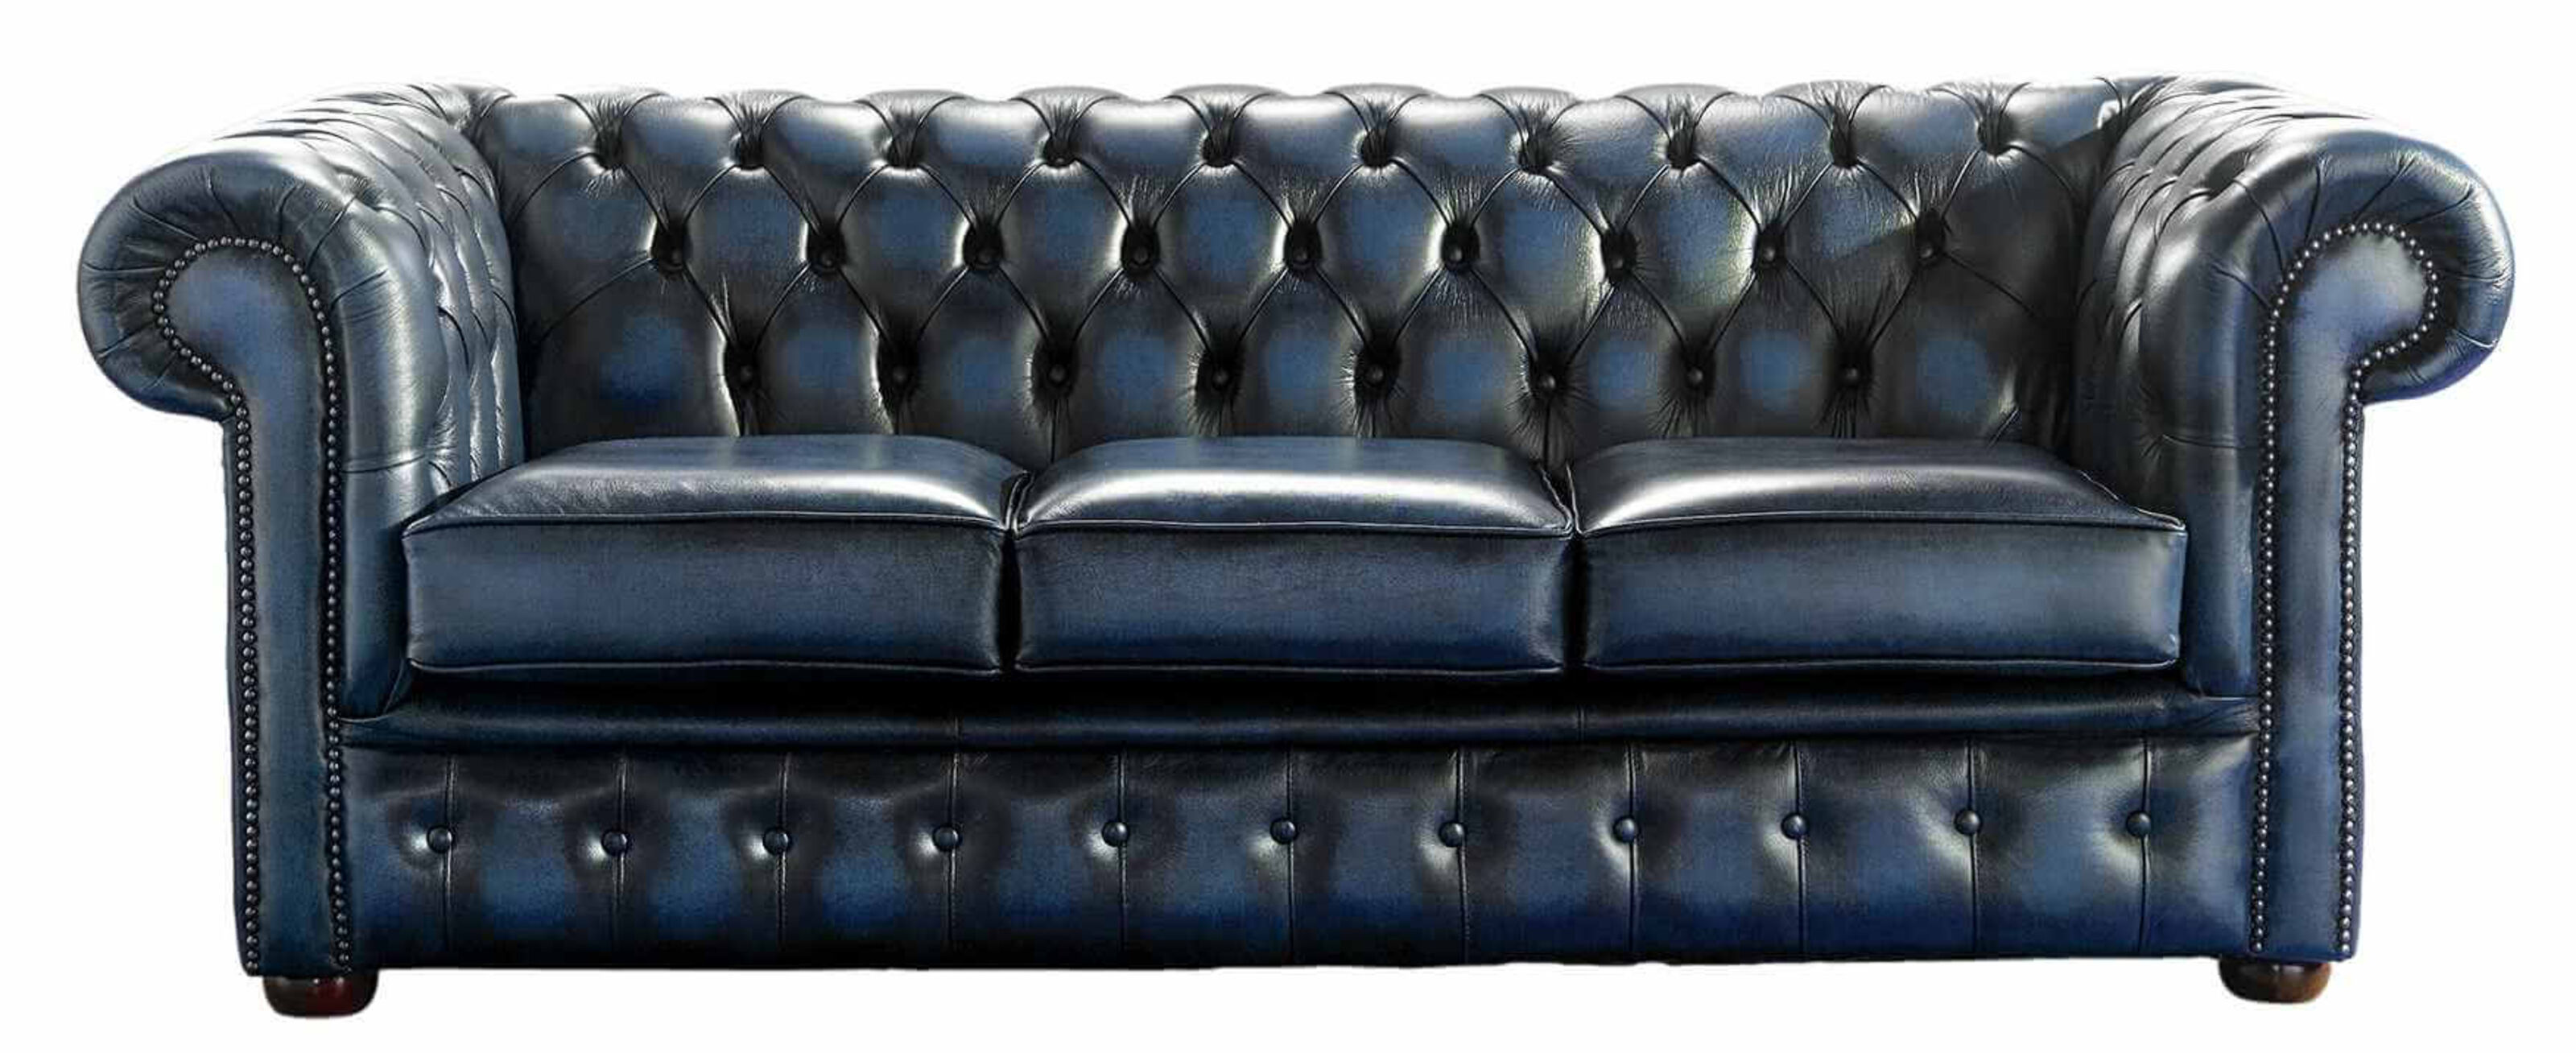 Choosing Between Tradition and Comfort Chesterfield vs. Couch  %Post Title